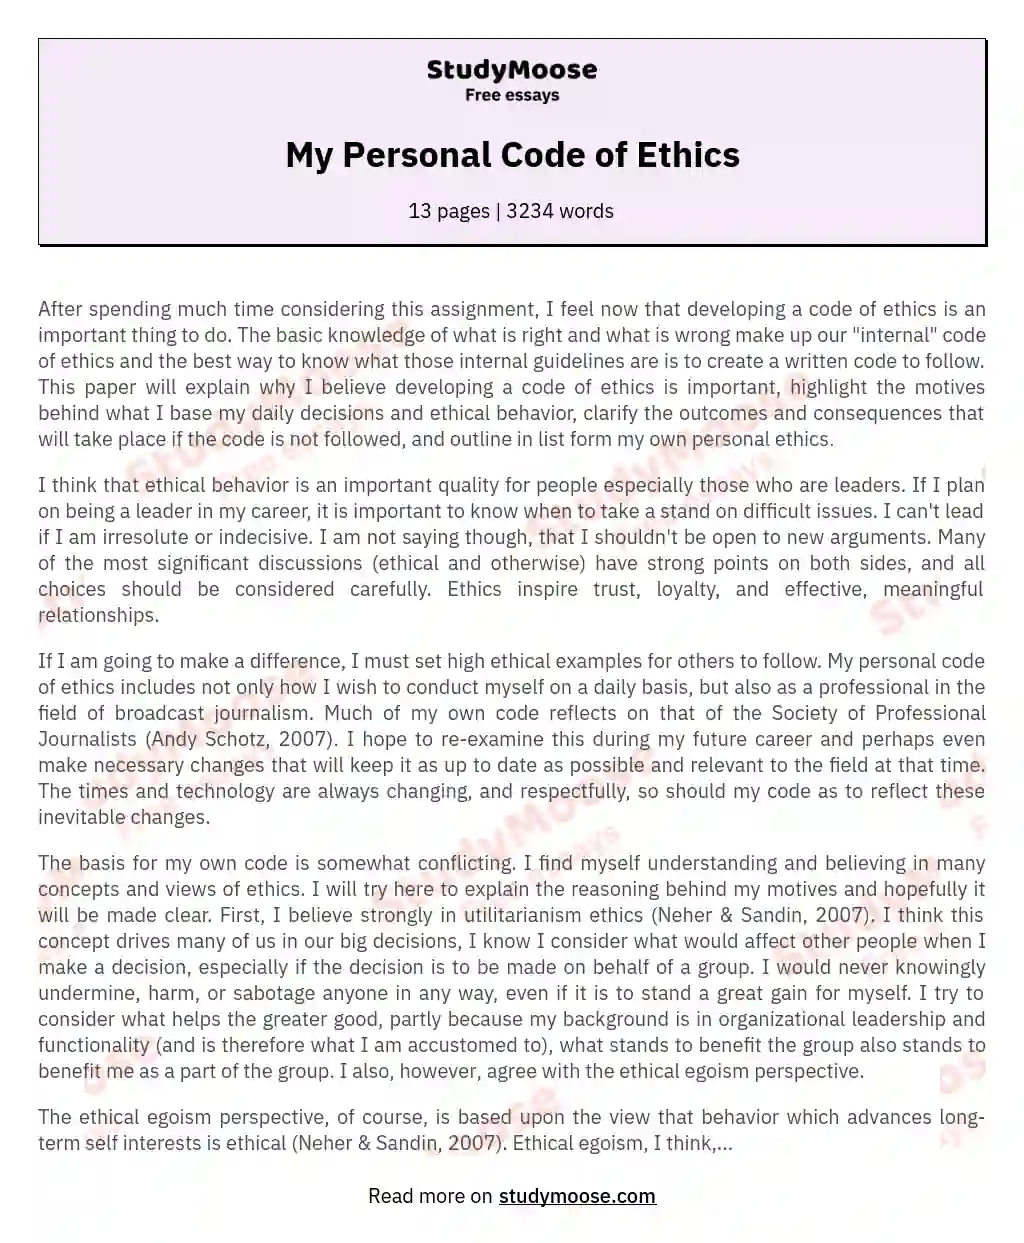 My Personal Code of Ethics